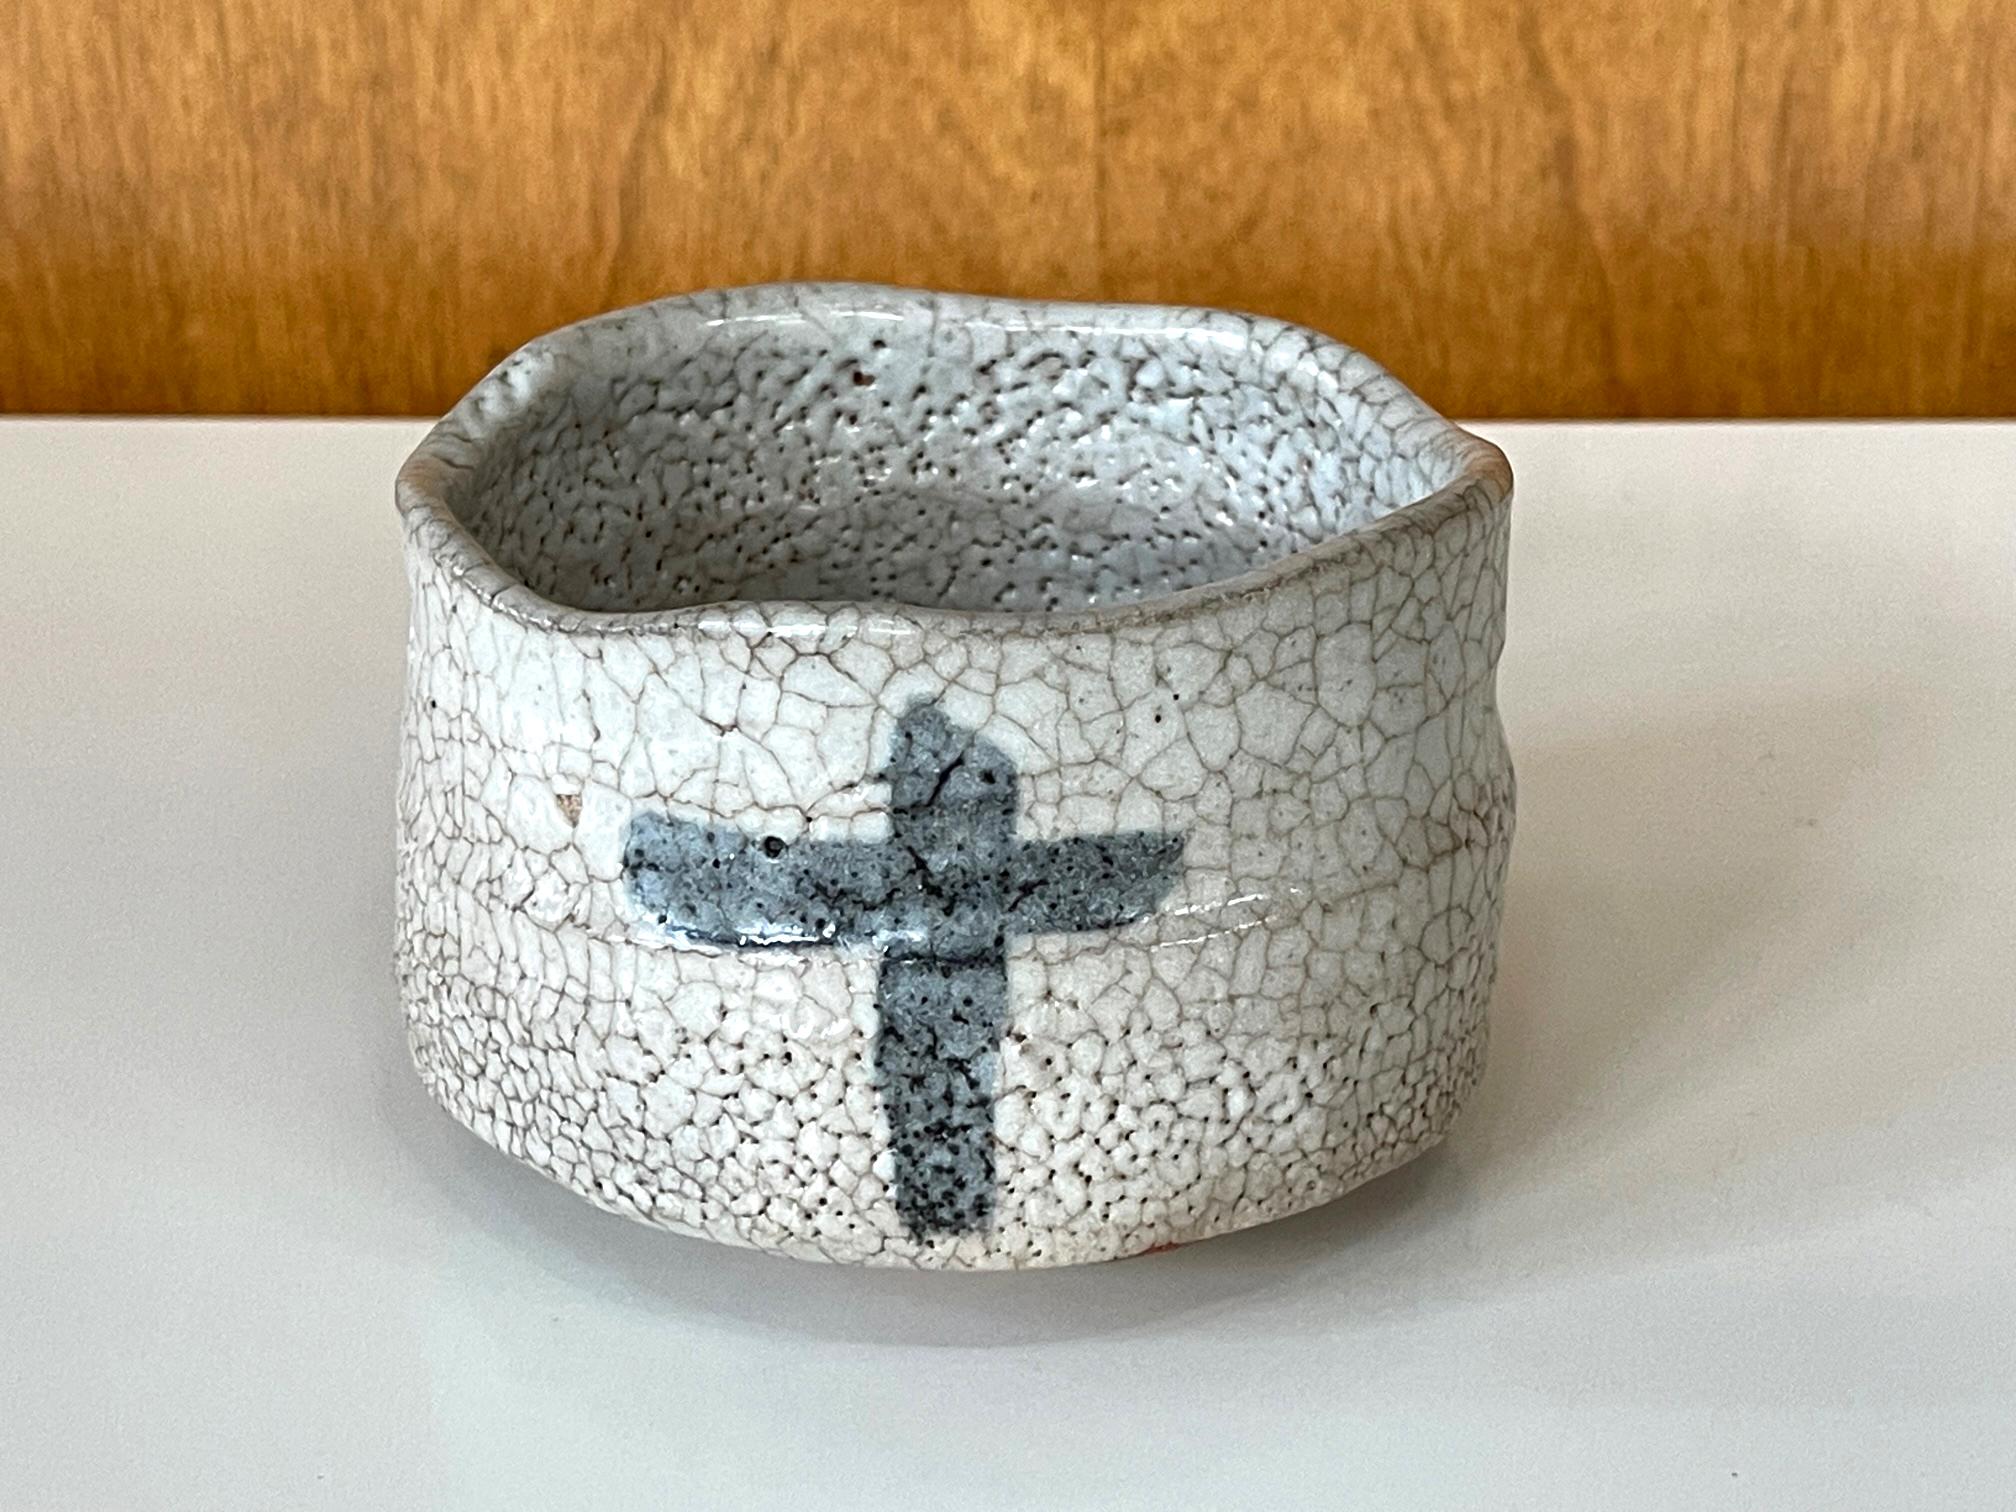 A modern Japanese ceramic tea bowl (chawan) made by potter Toyoda Katsuhiko (1945-). The bowl was potted in clog form with a short ring foot in the tradition of Shino ware. Its size and harmonious proportion make it perfect to be held in both hands